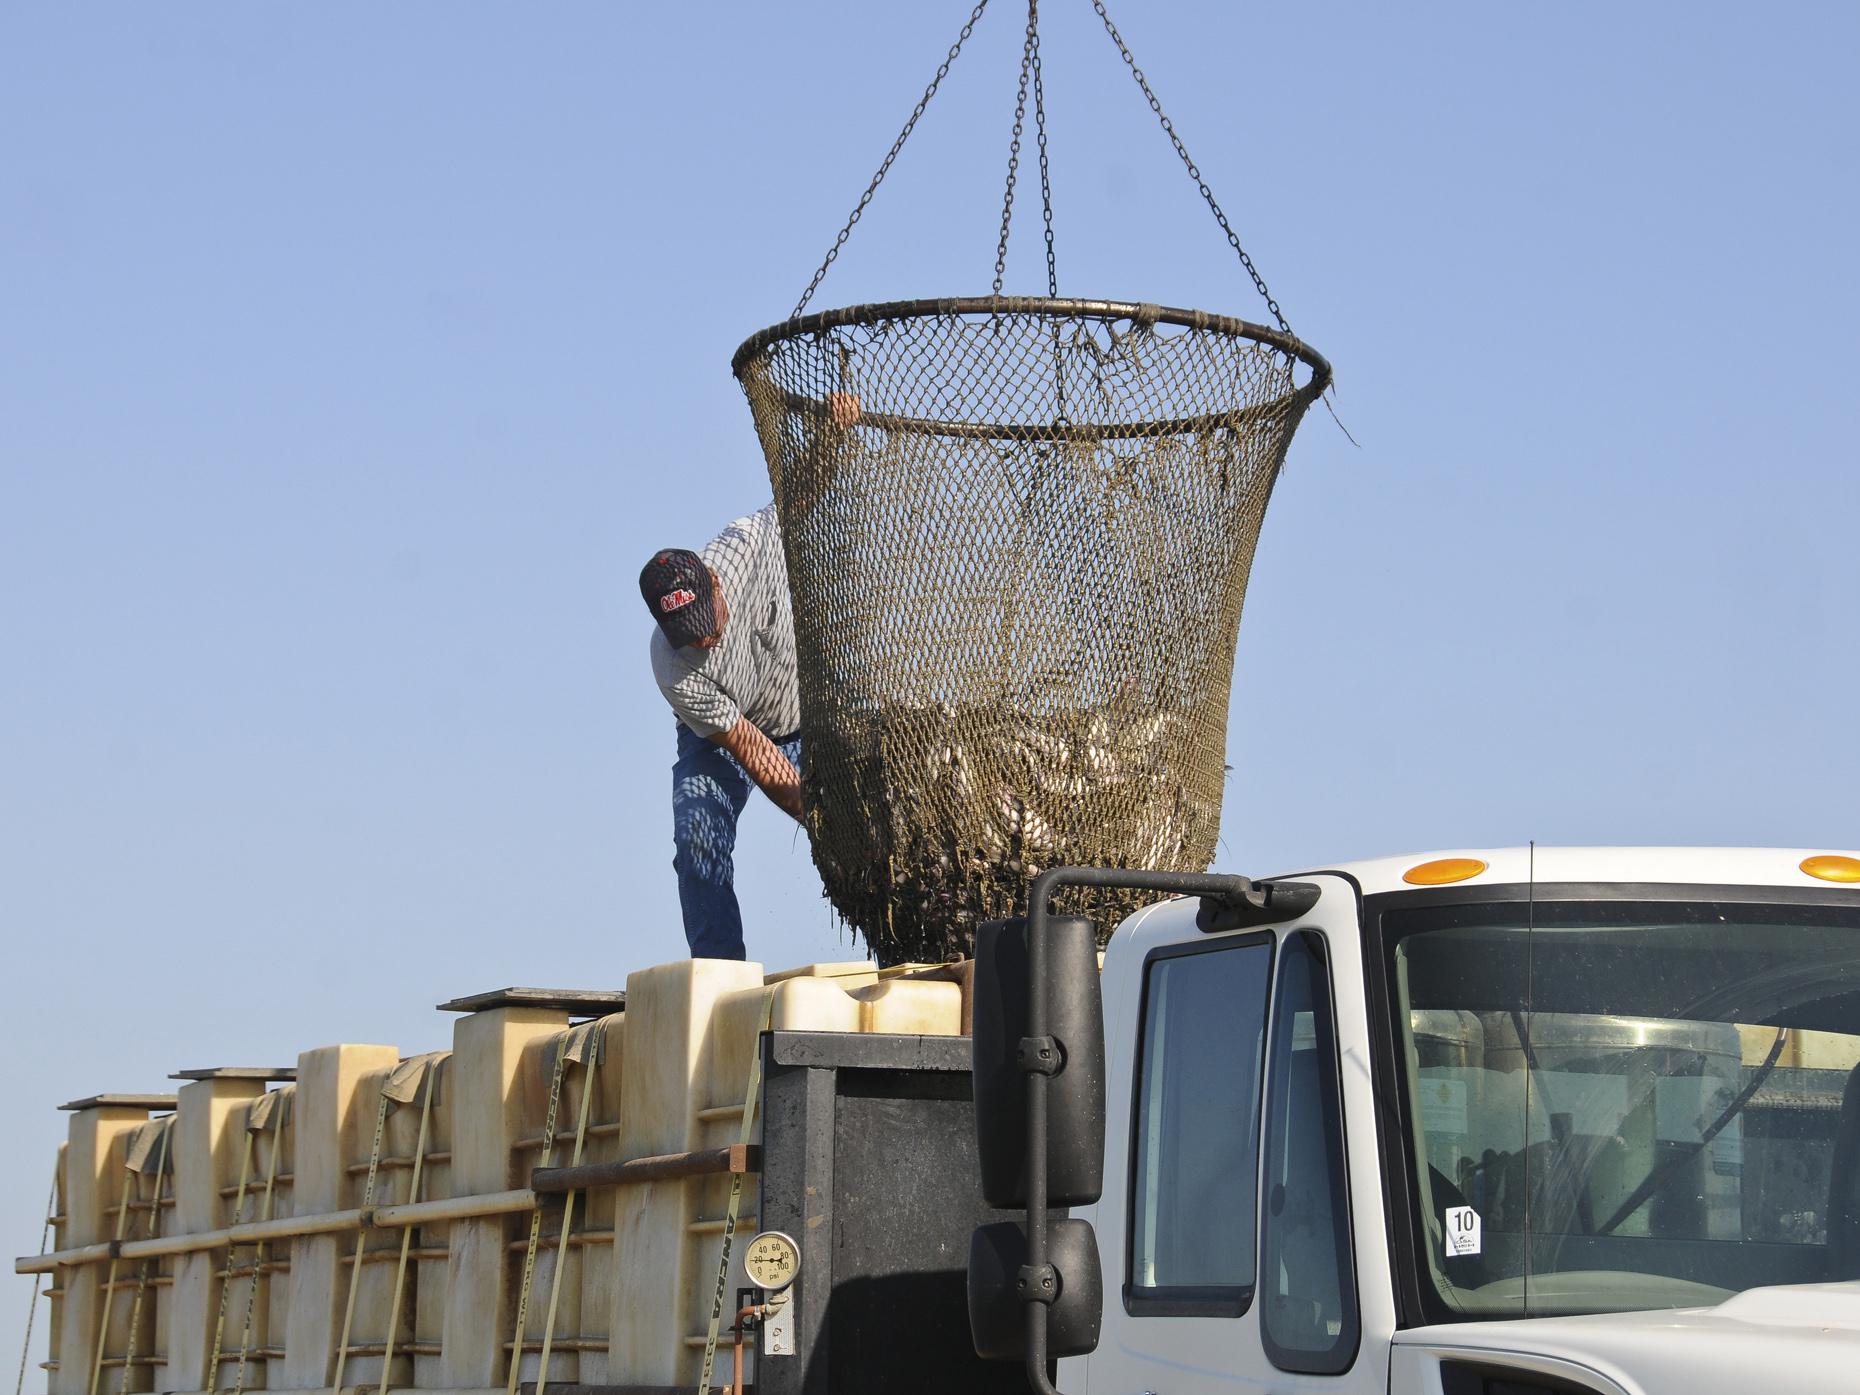 Caught in a trap of high input costs and low pond bank prices, Mississippi's catfish farmers struggle to break even as the nation's drought tightens feed supplies. (Photo by MSU Ag Communications/Scott Corey)